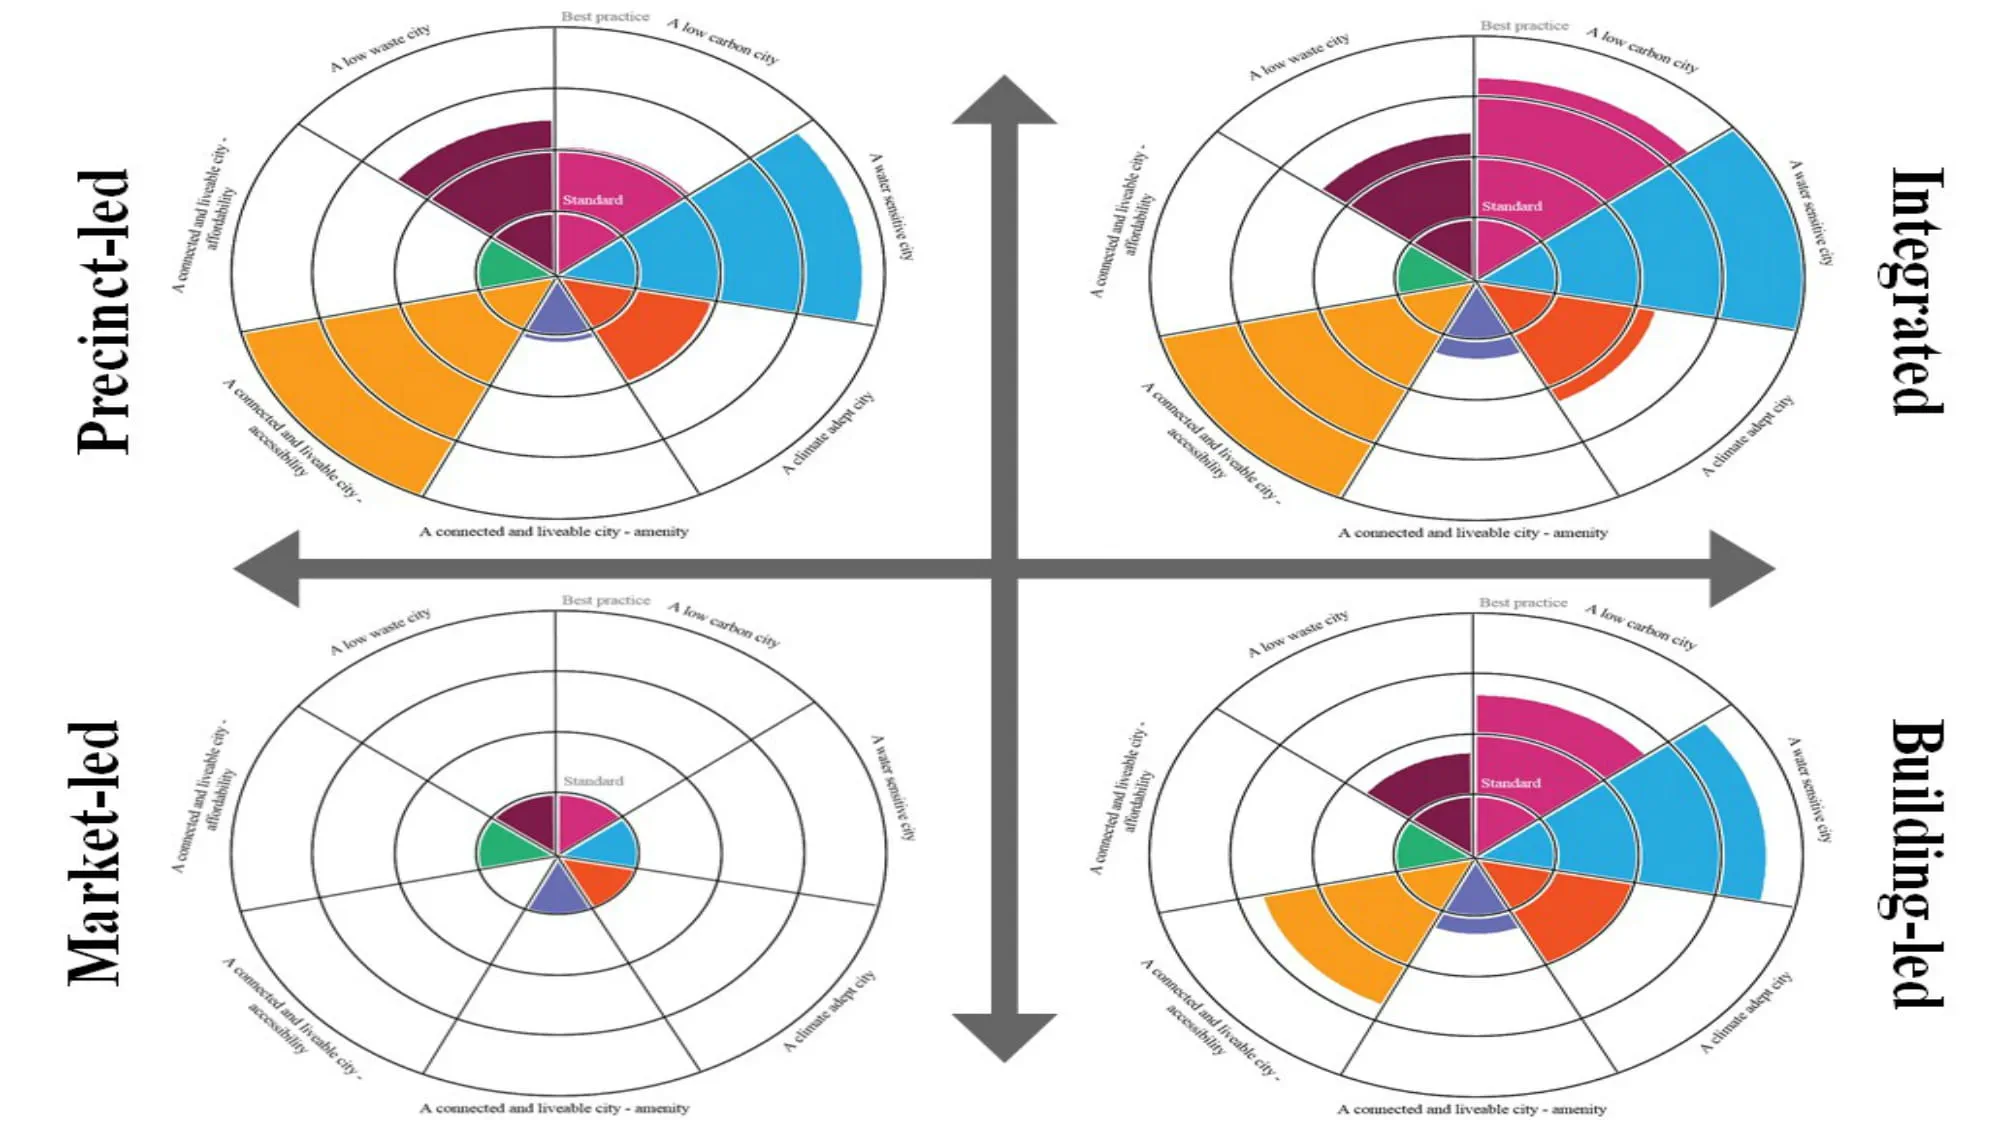 Diagrams showing how each of the four development options compared across seven sustainability goals